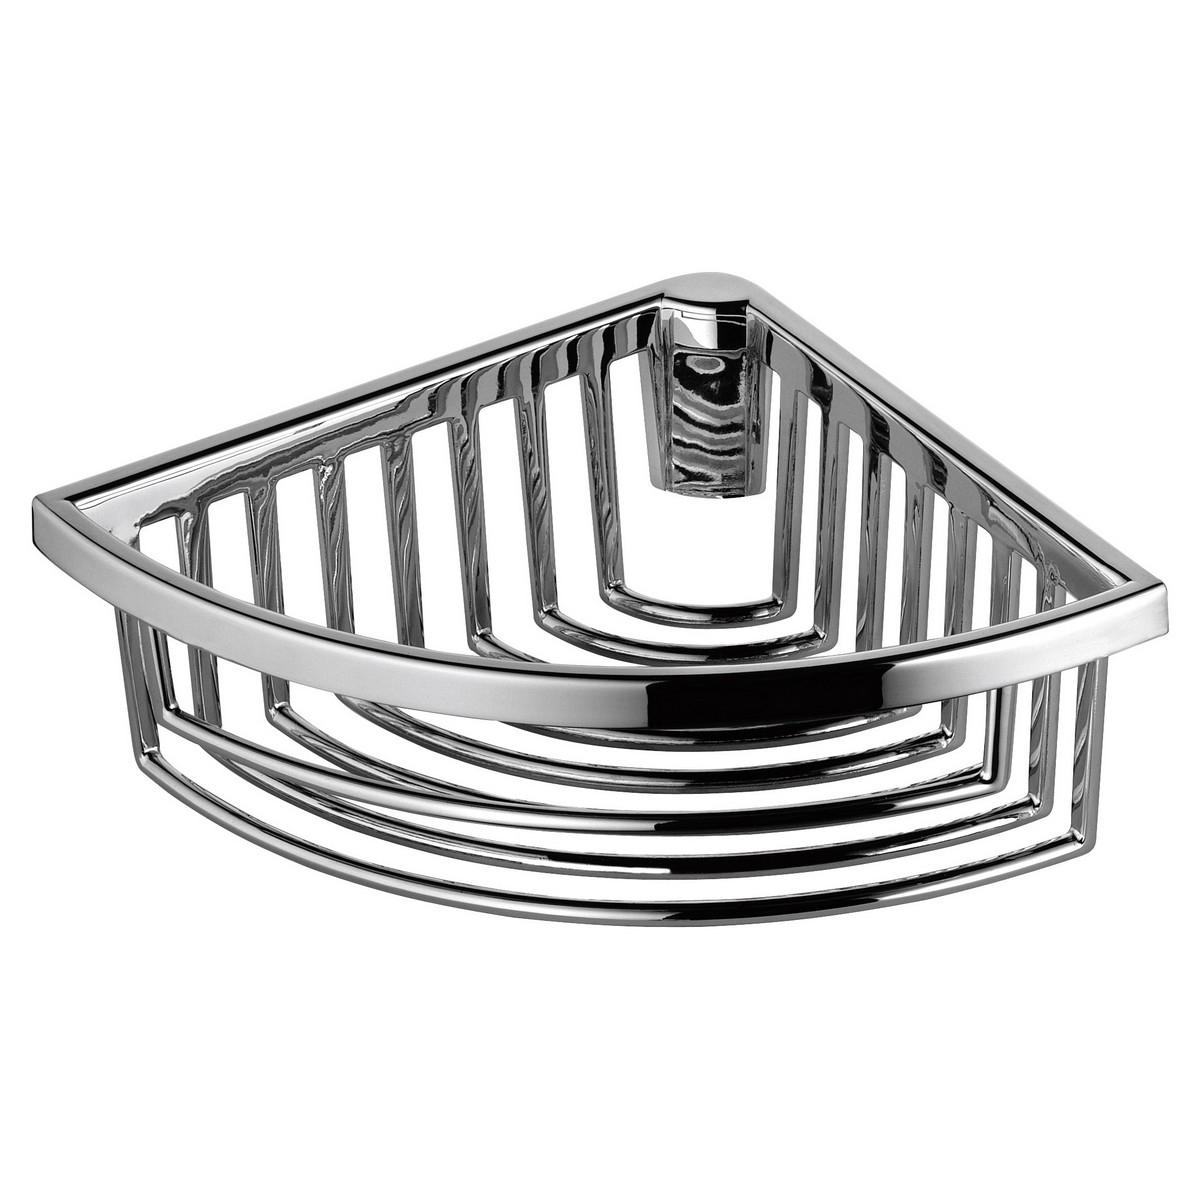 KEUCO 24944010100 10 3/8 X 2 7/8 INCH WALL MOUNTED SOAP WIRE BASKET IN POLISHED CHROME